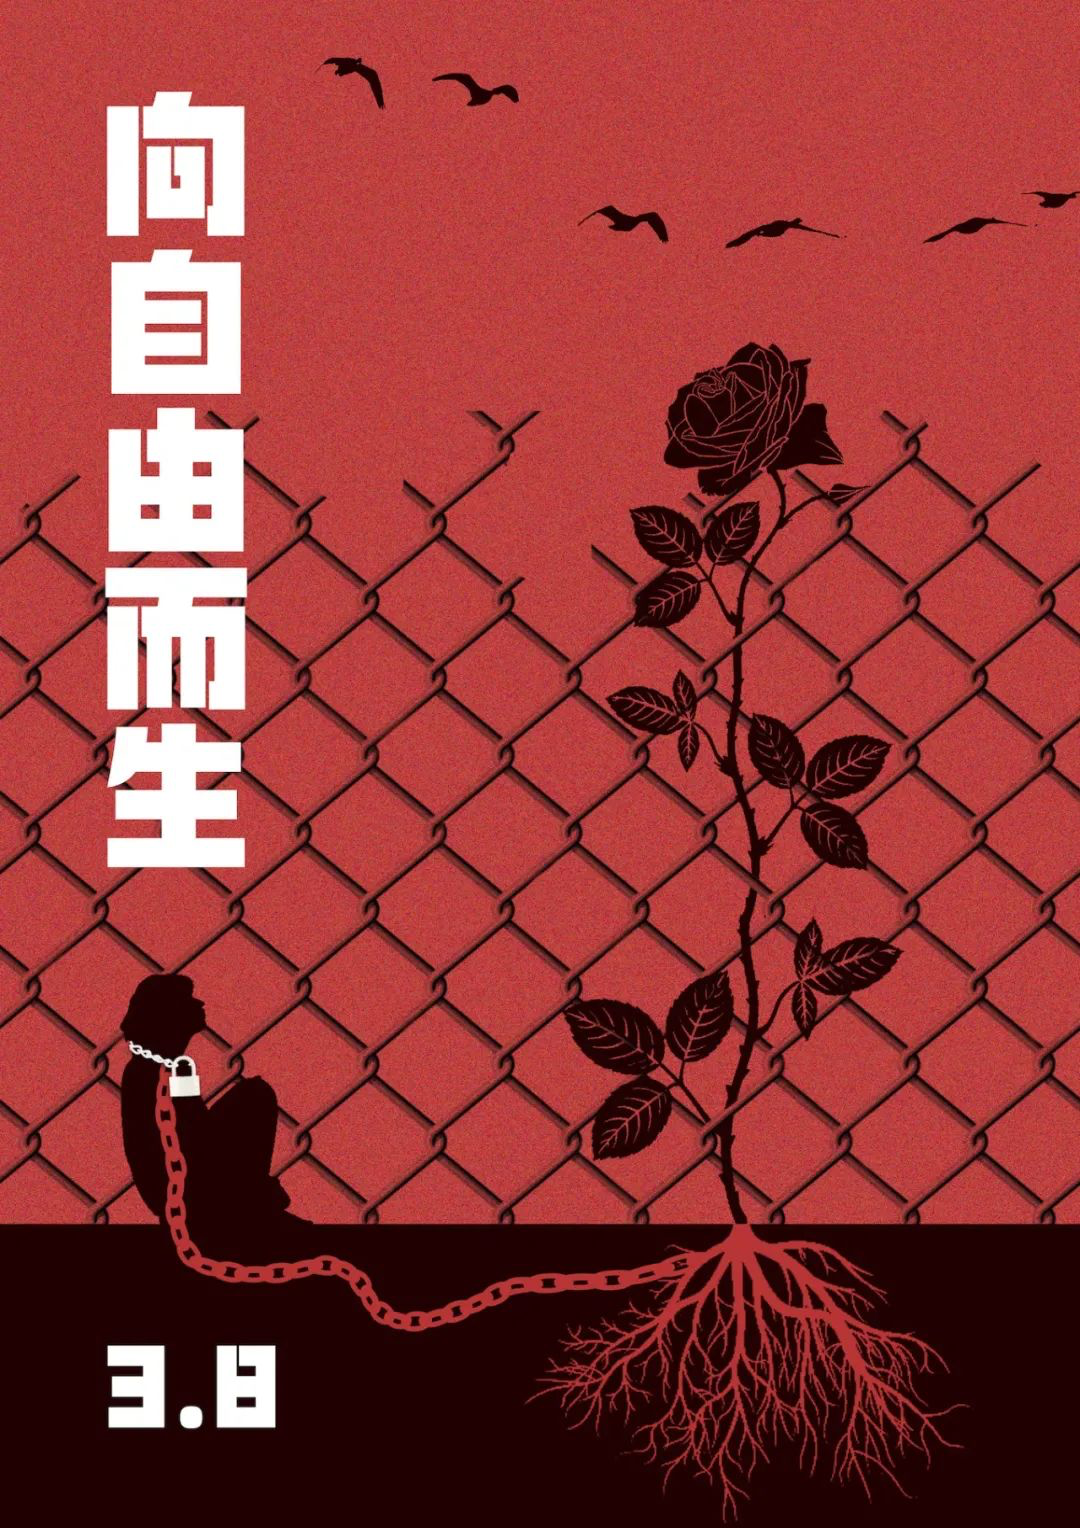 Red and black poster features a woman shackled to a rose, which grows through and above the chainlink fence that the woman is gazing through.